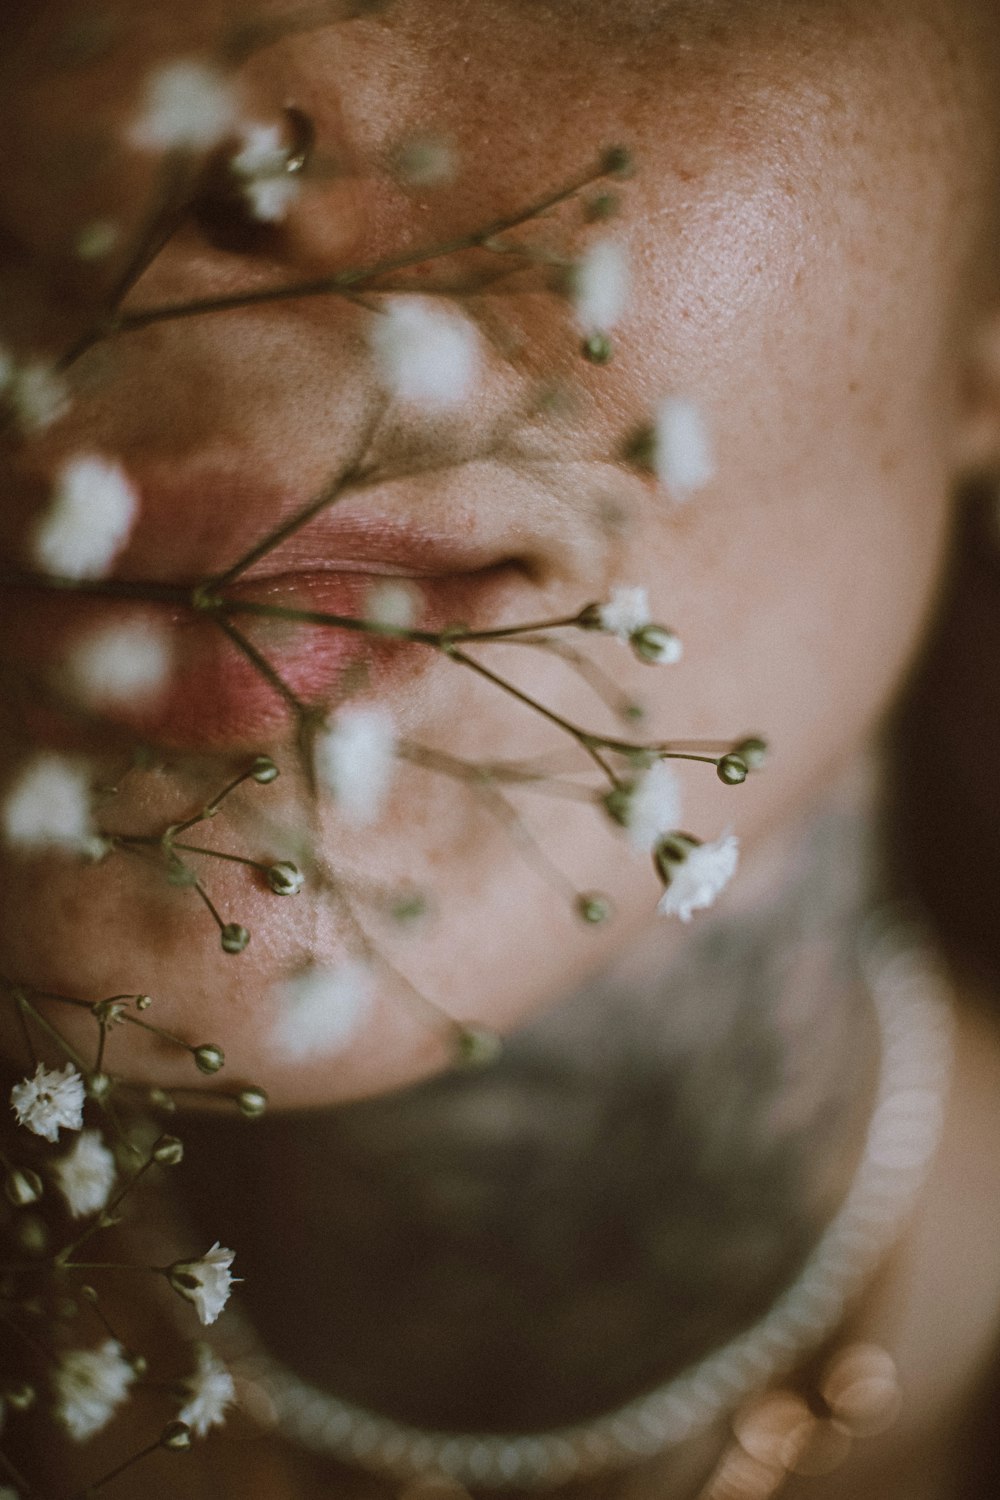 a close up of a woman's face with flowers in her mouth